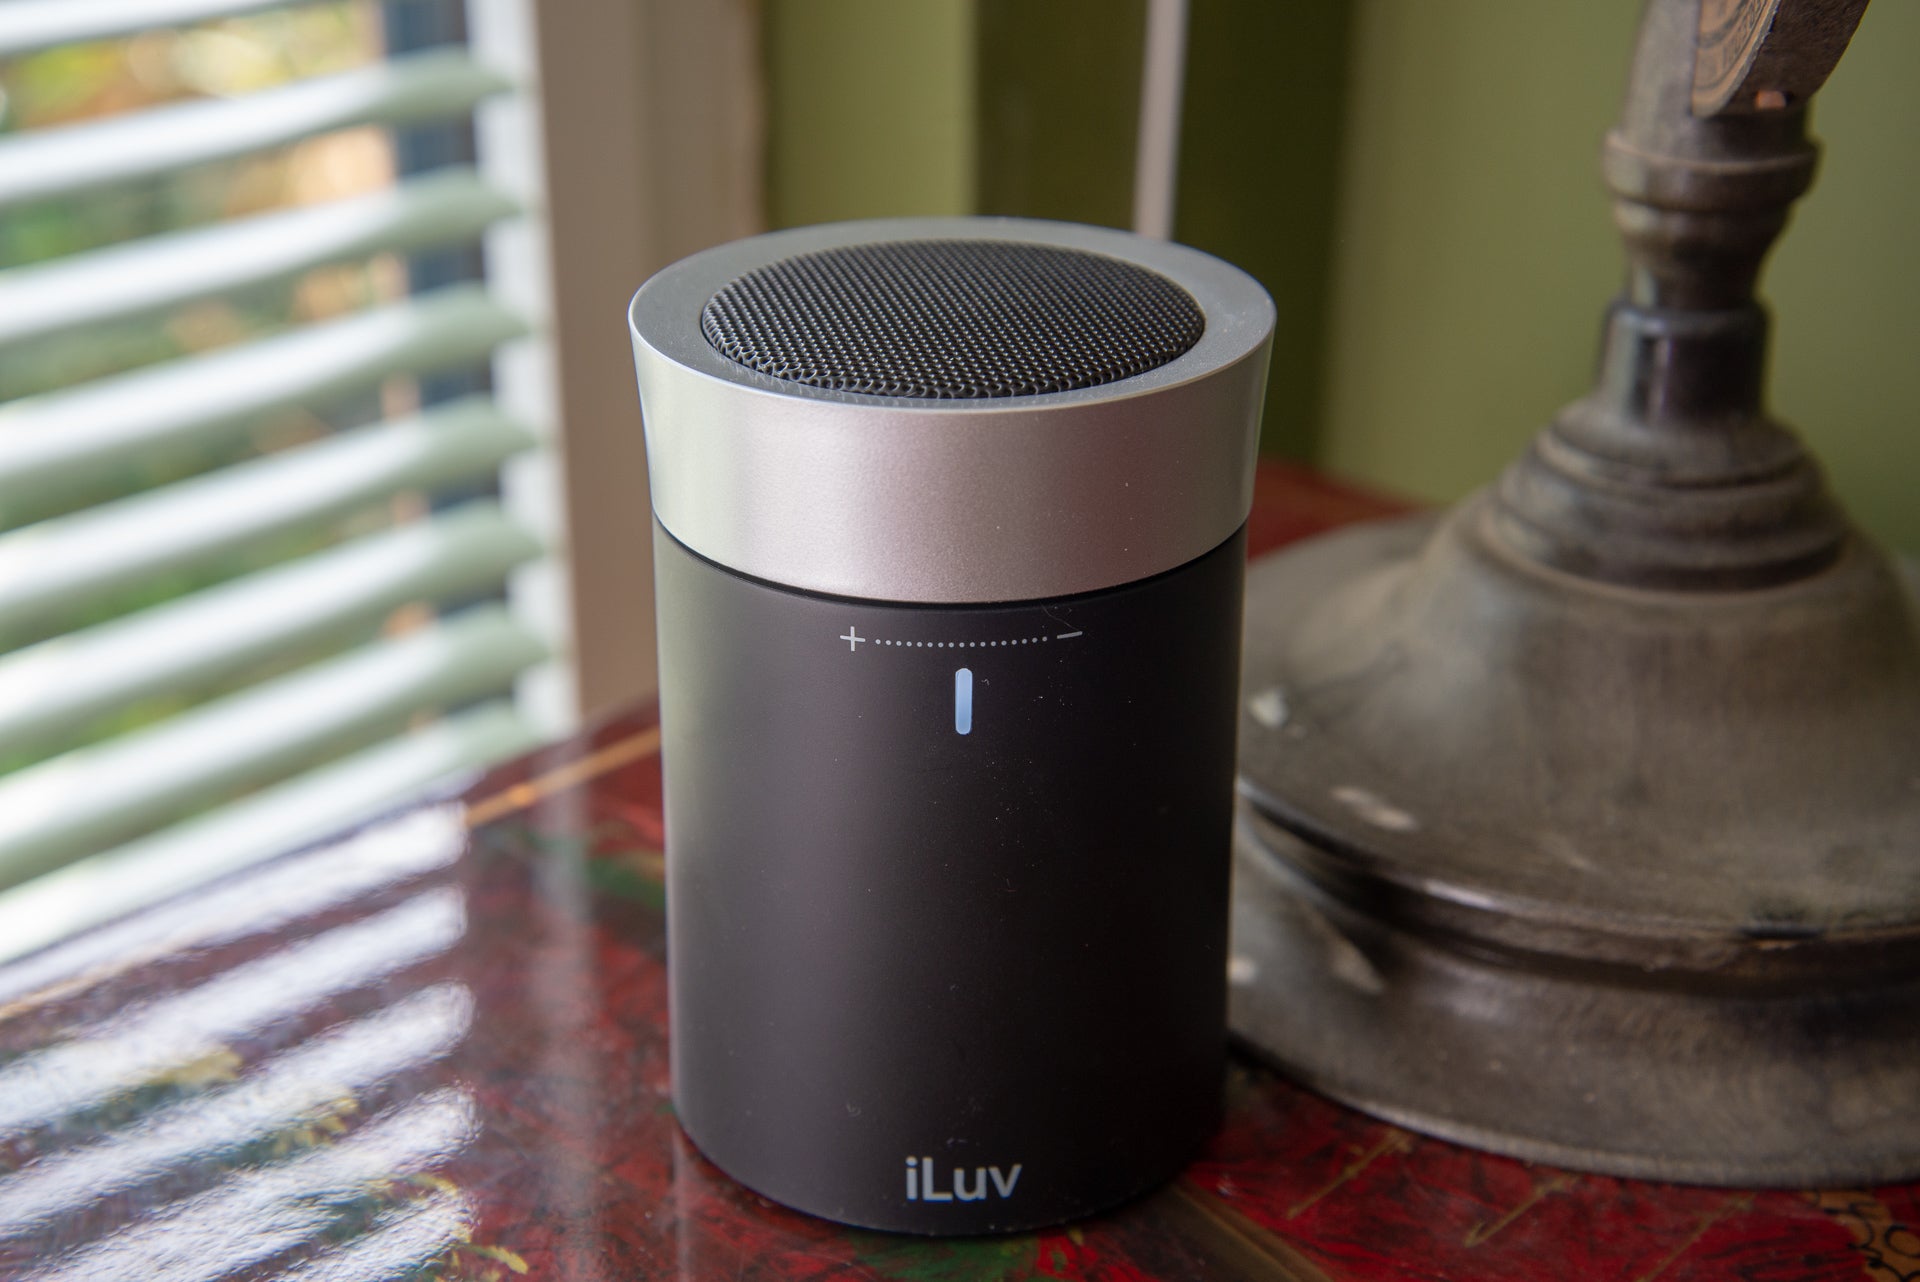 iLuv Aud Click portable speaker on a table.